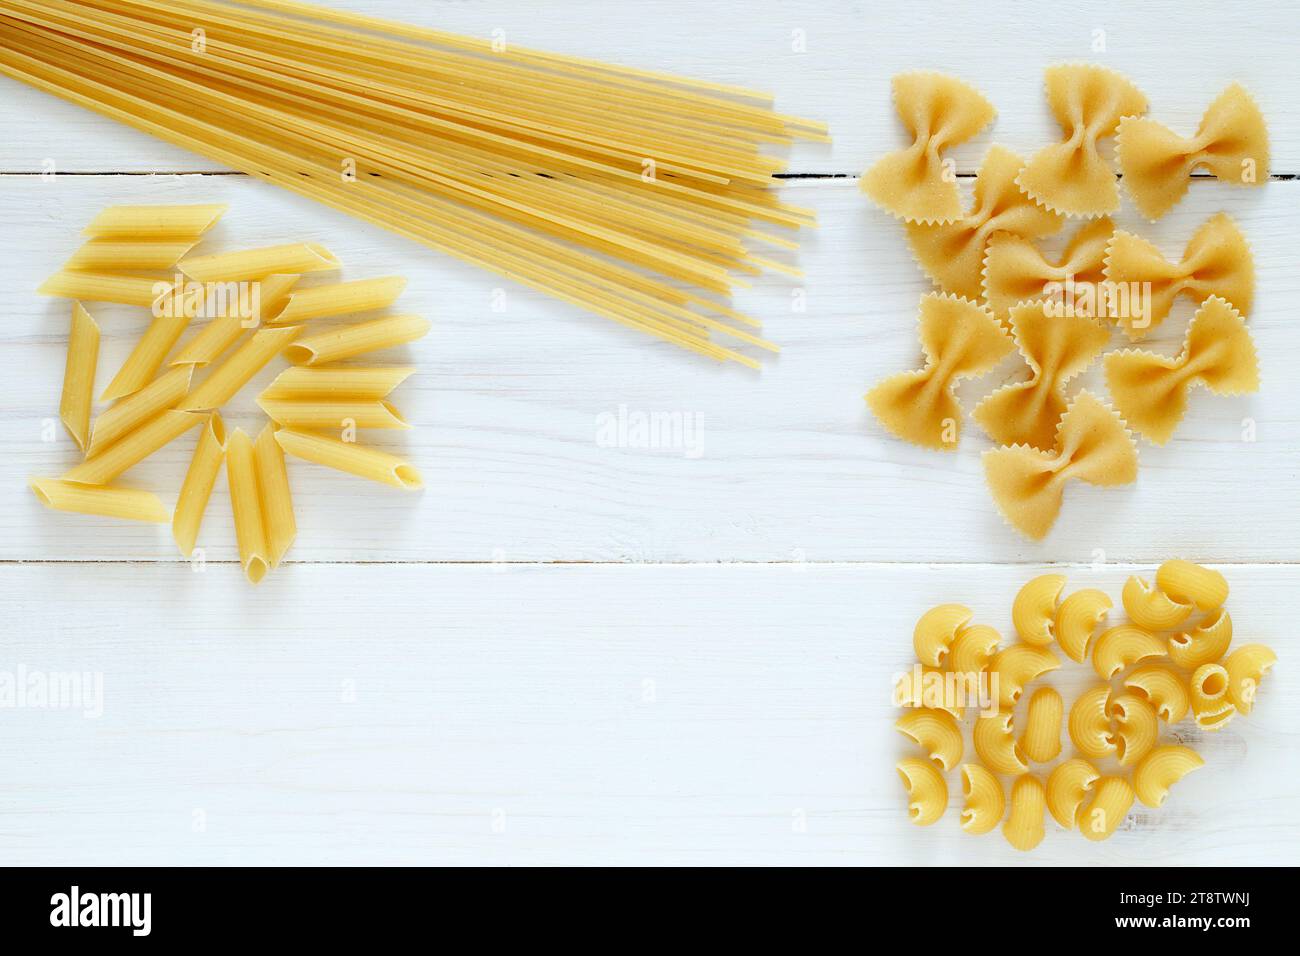 Maccheroni raw, mixed, on white wooden board background, top view, space to copy text. Stock Photo